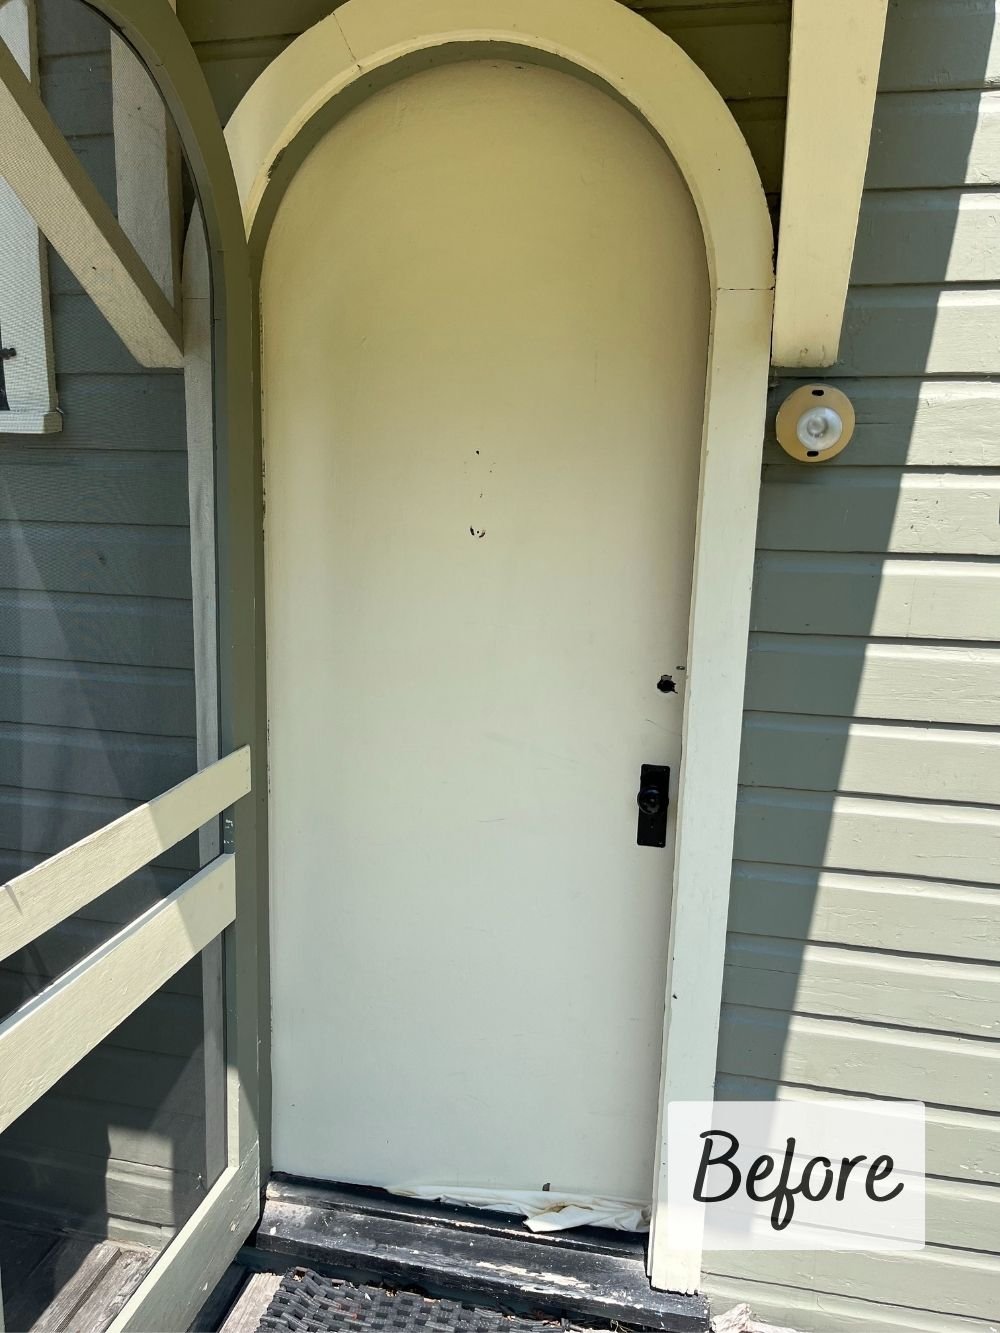 BEFORE | The cream door was fine but left something to be desired!